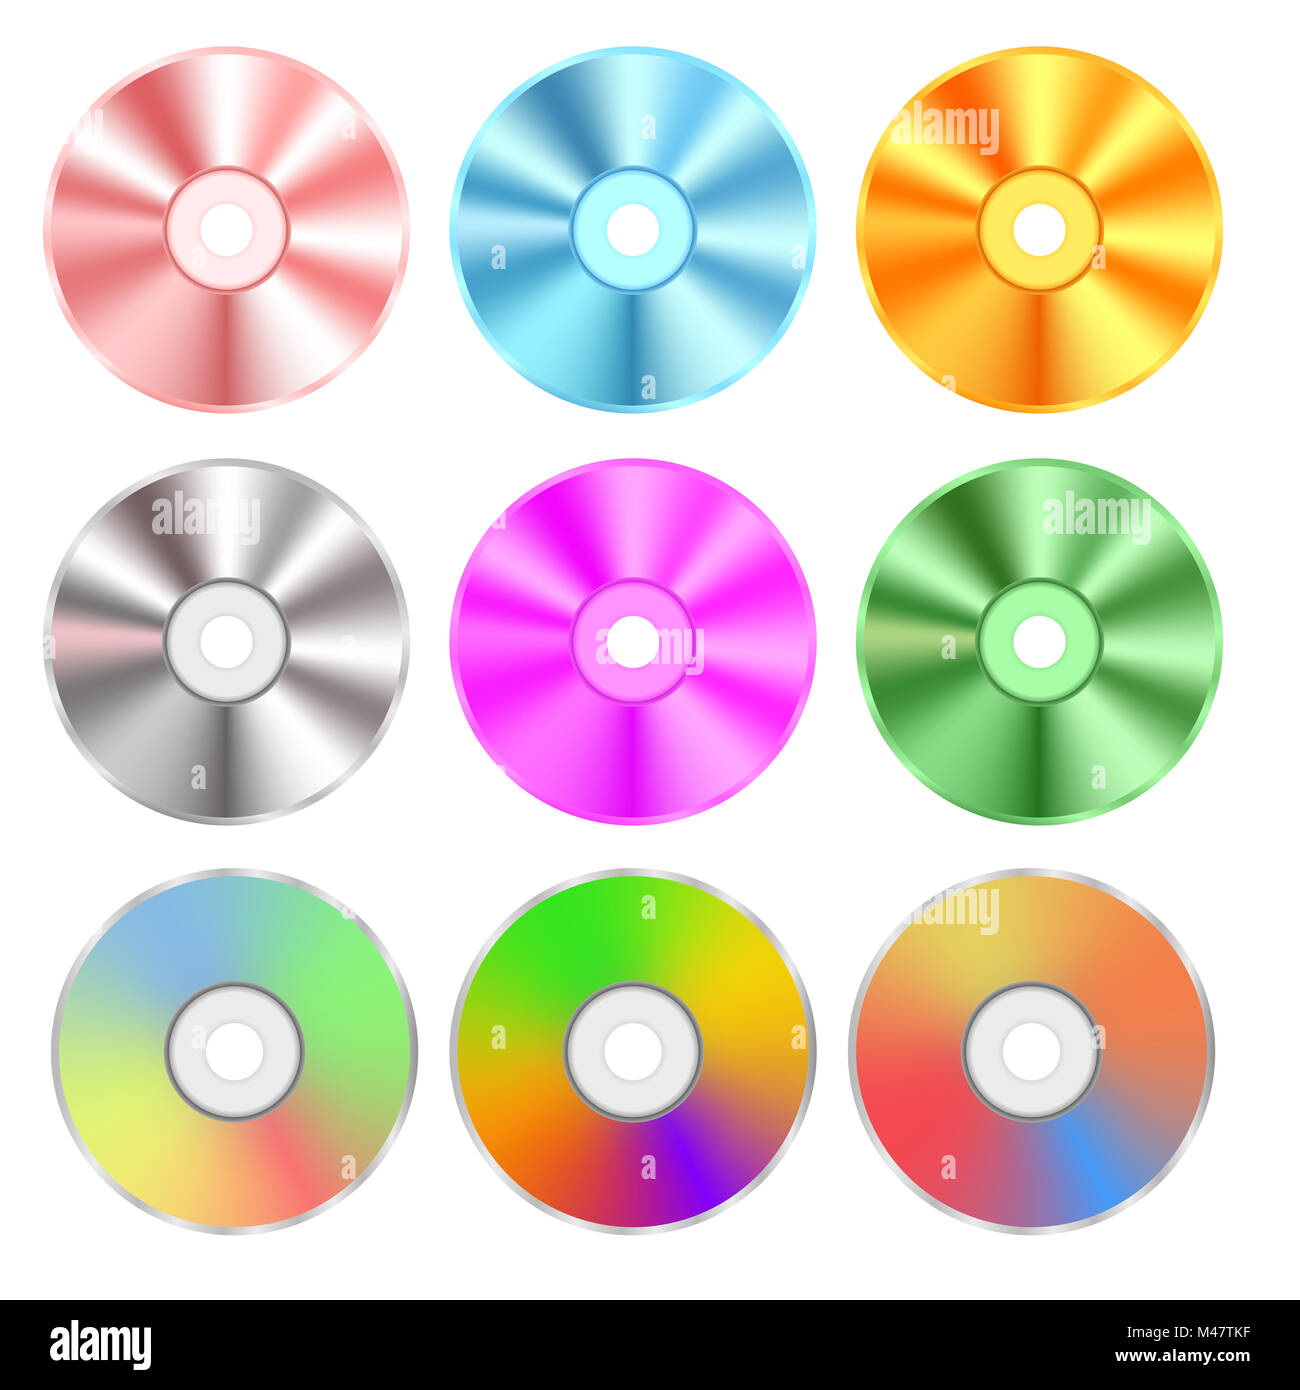 Set of Realistic Colorful Compact Discs Isolated Stock Photo